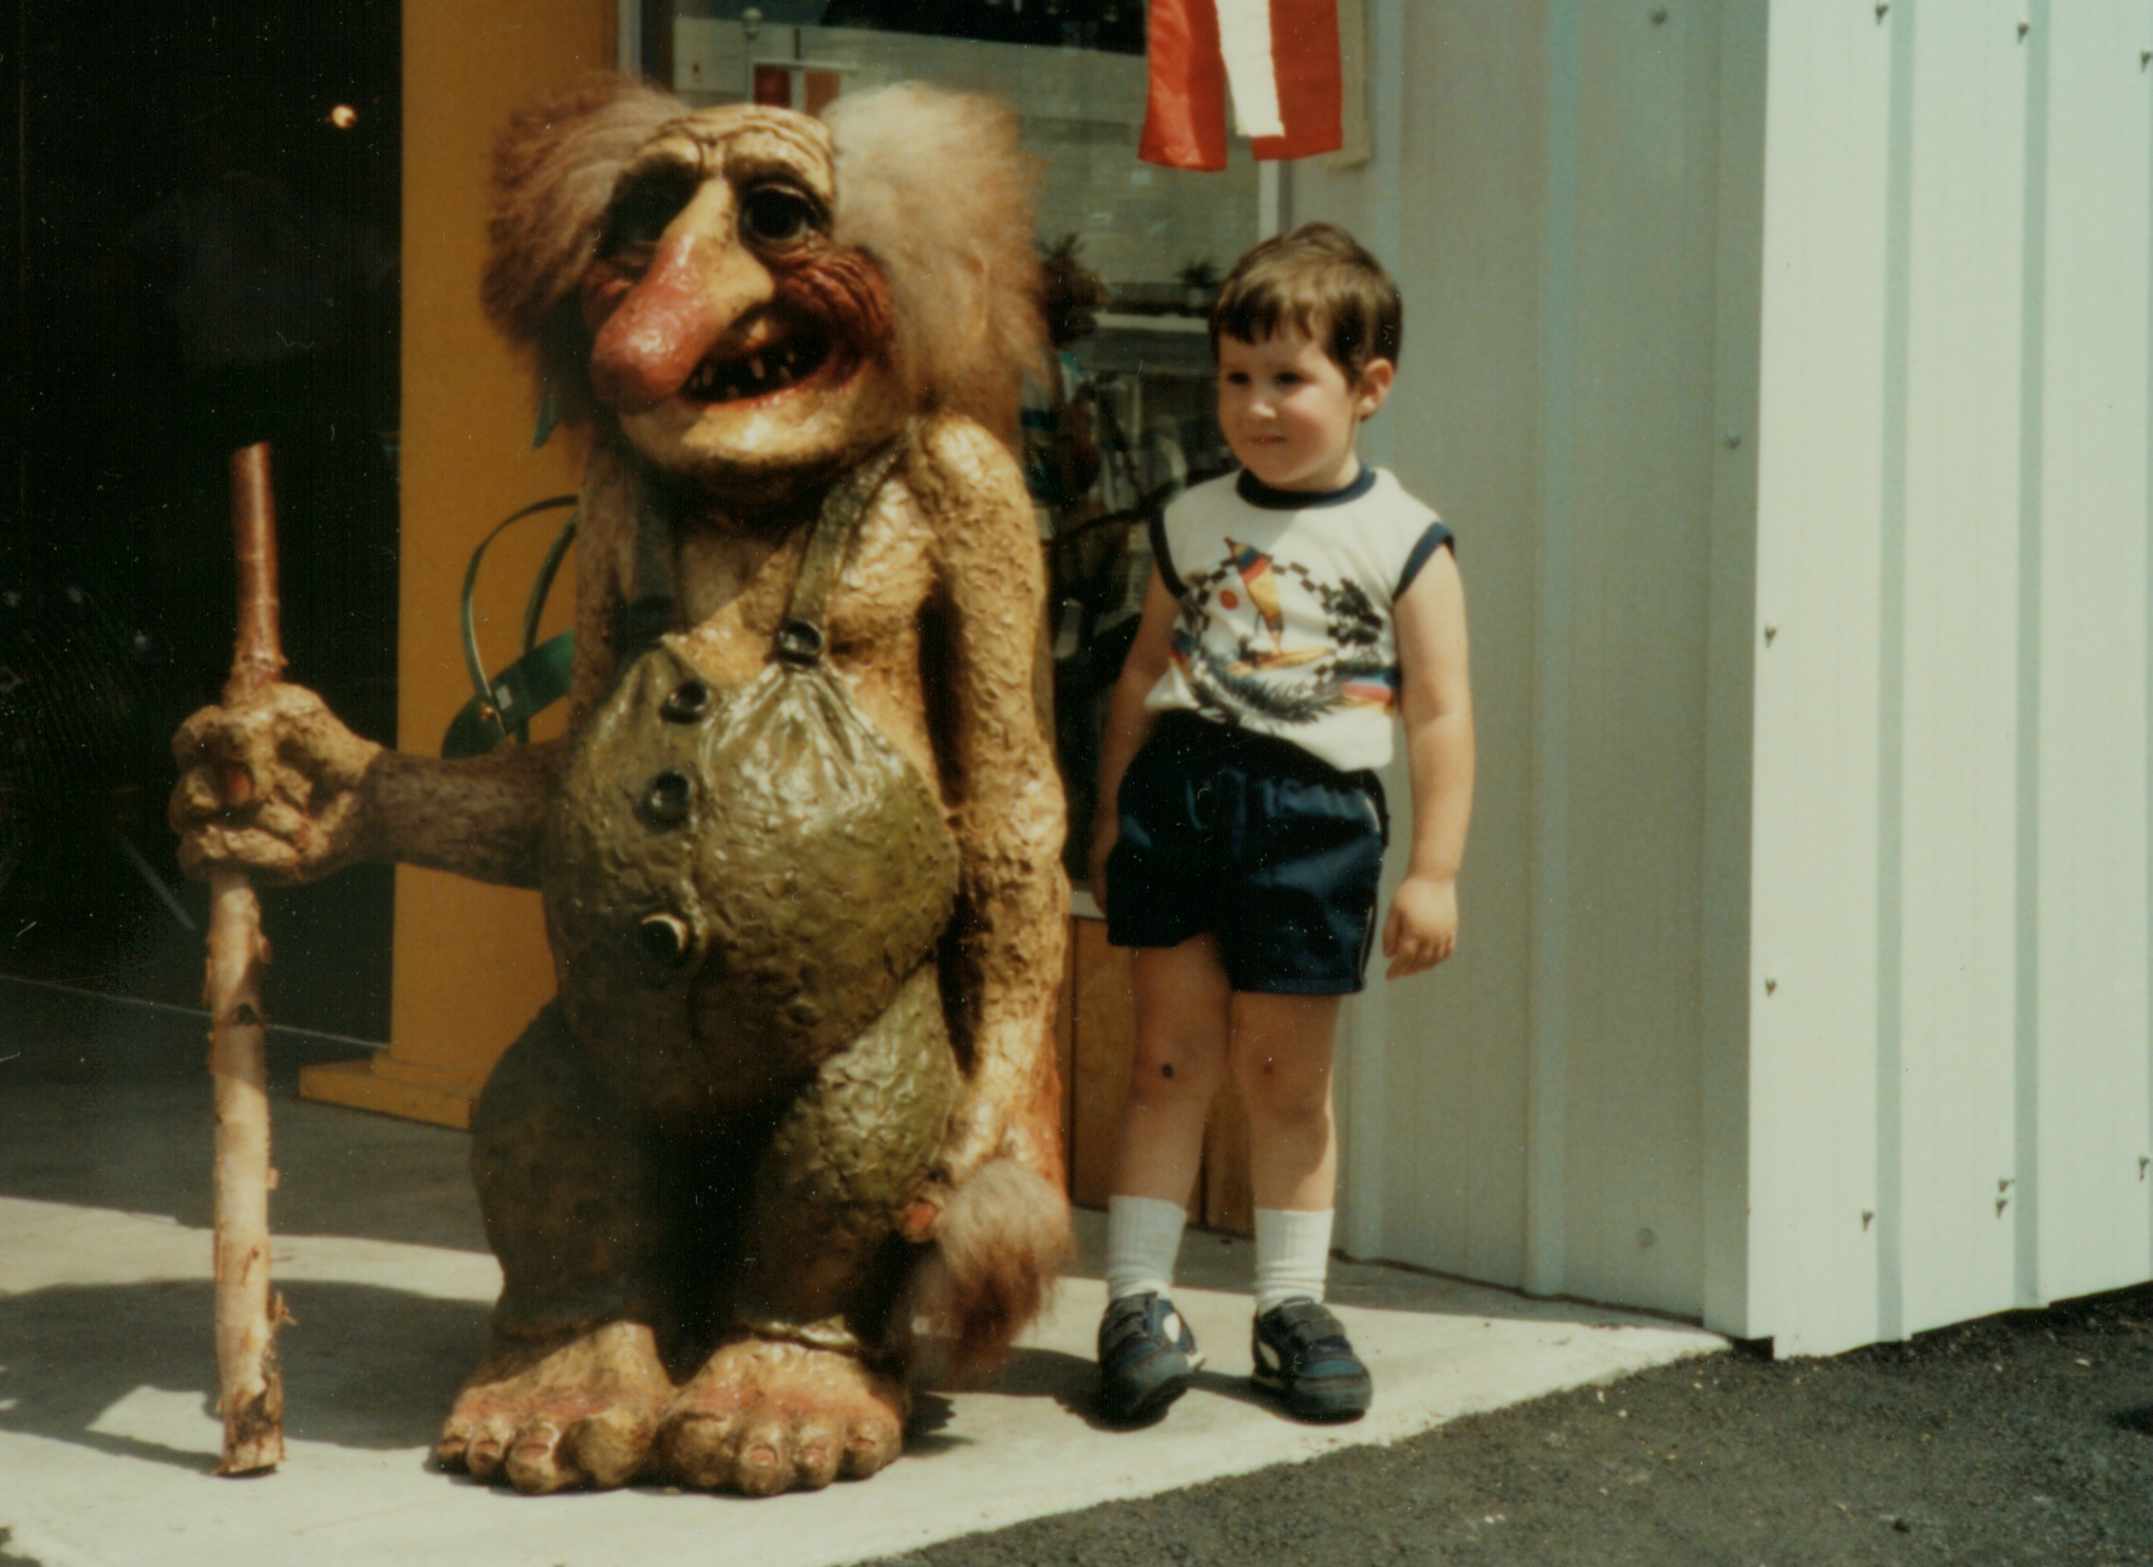 Worlds_Fair_New_Orleans_Troll_and_Child.jpg